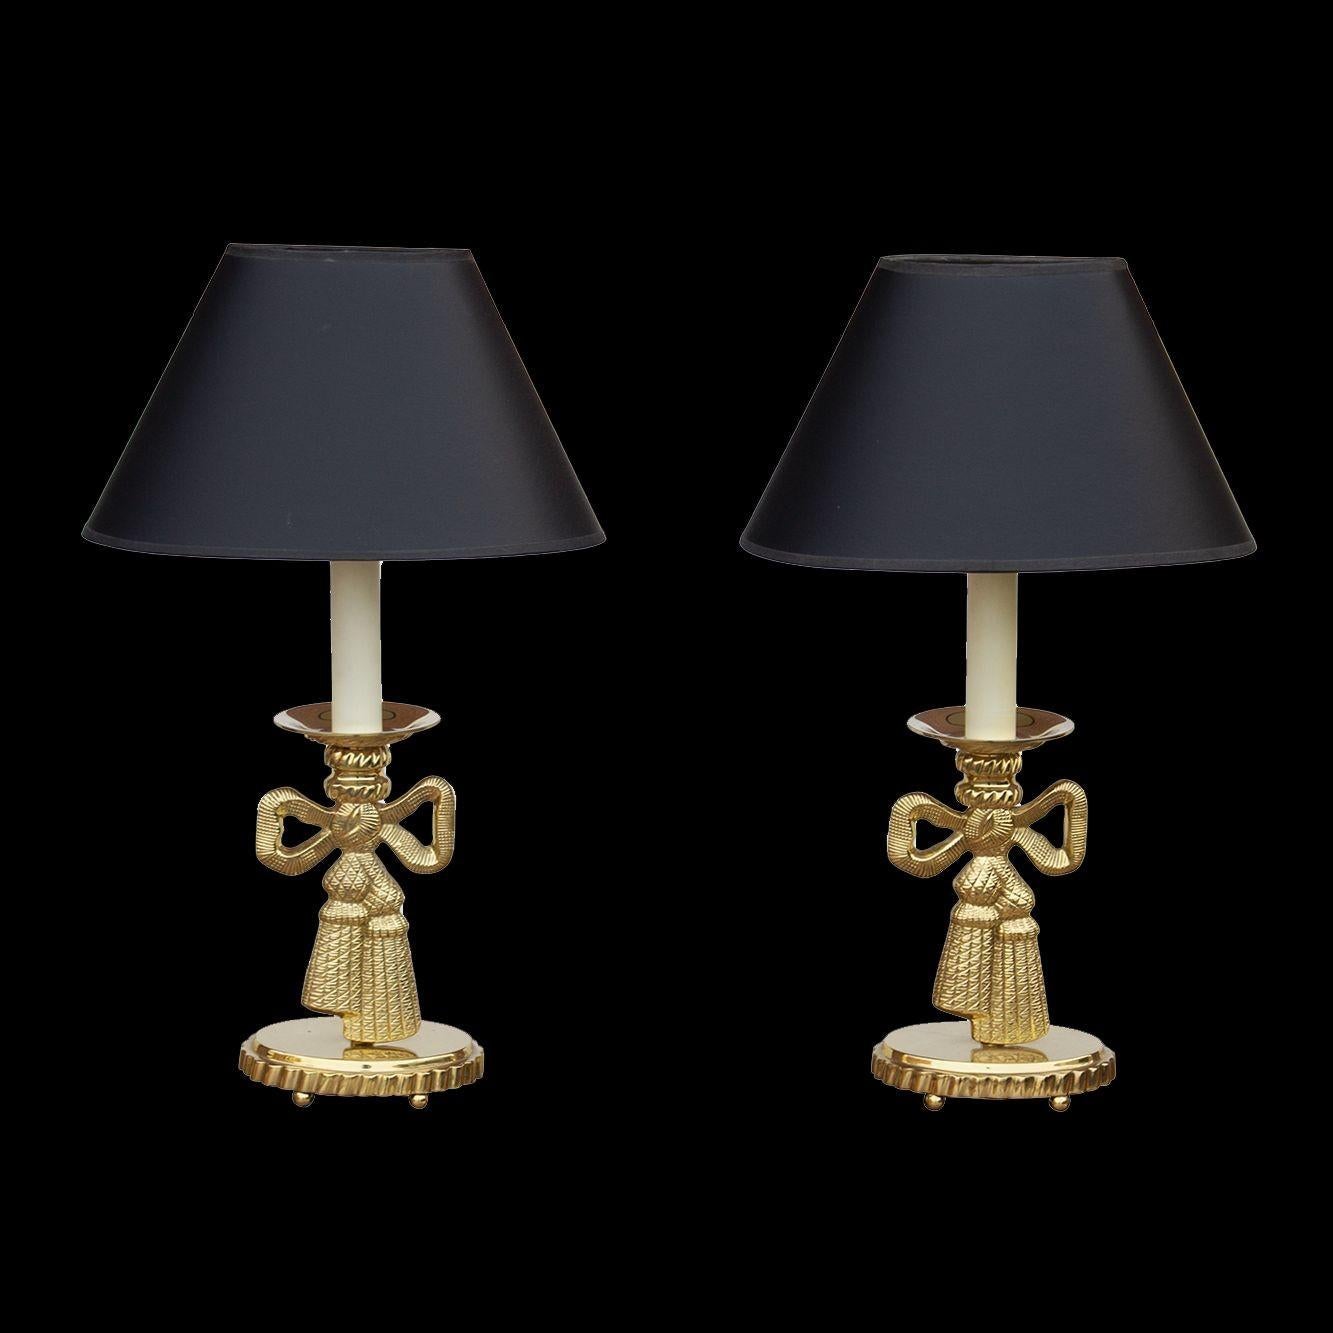 Pair of Solid Brass Candlestick Table Lamps with Bow Detail 4